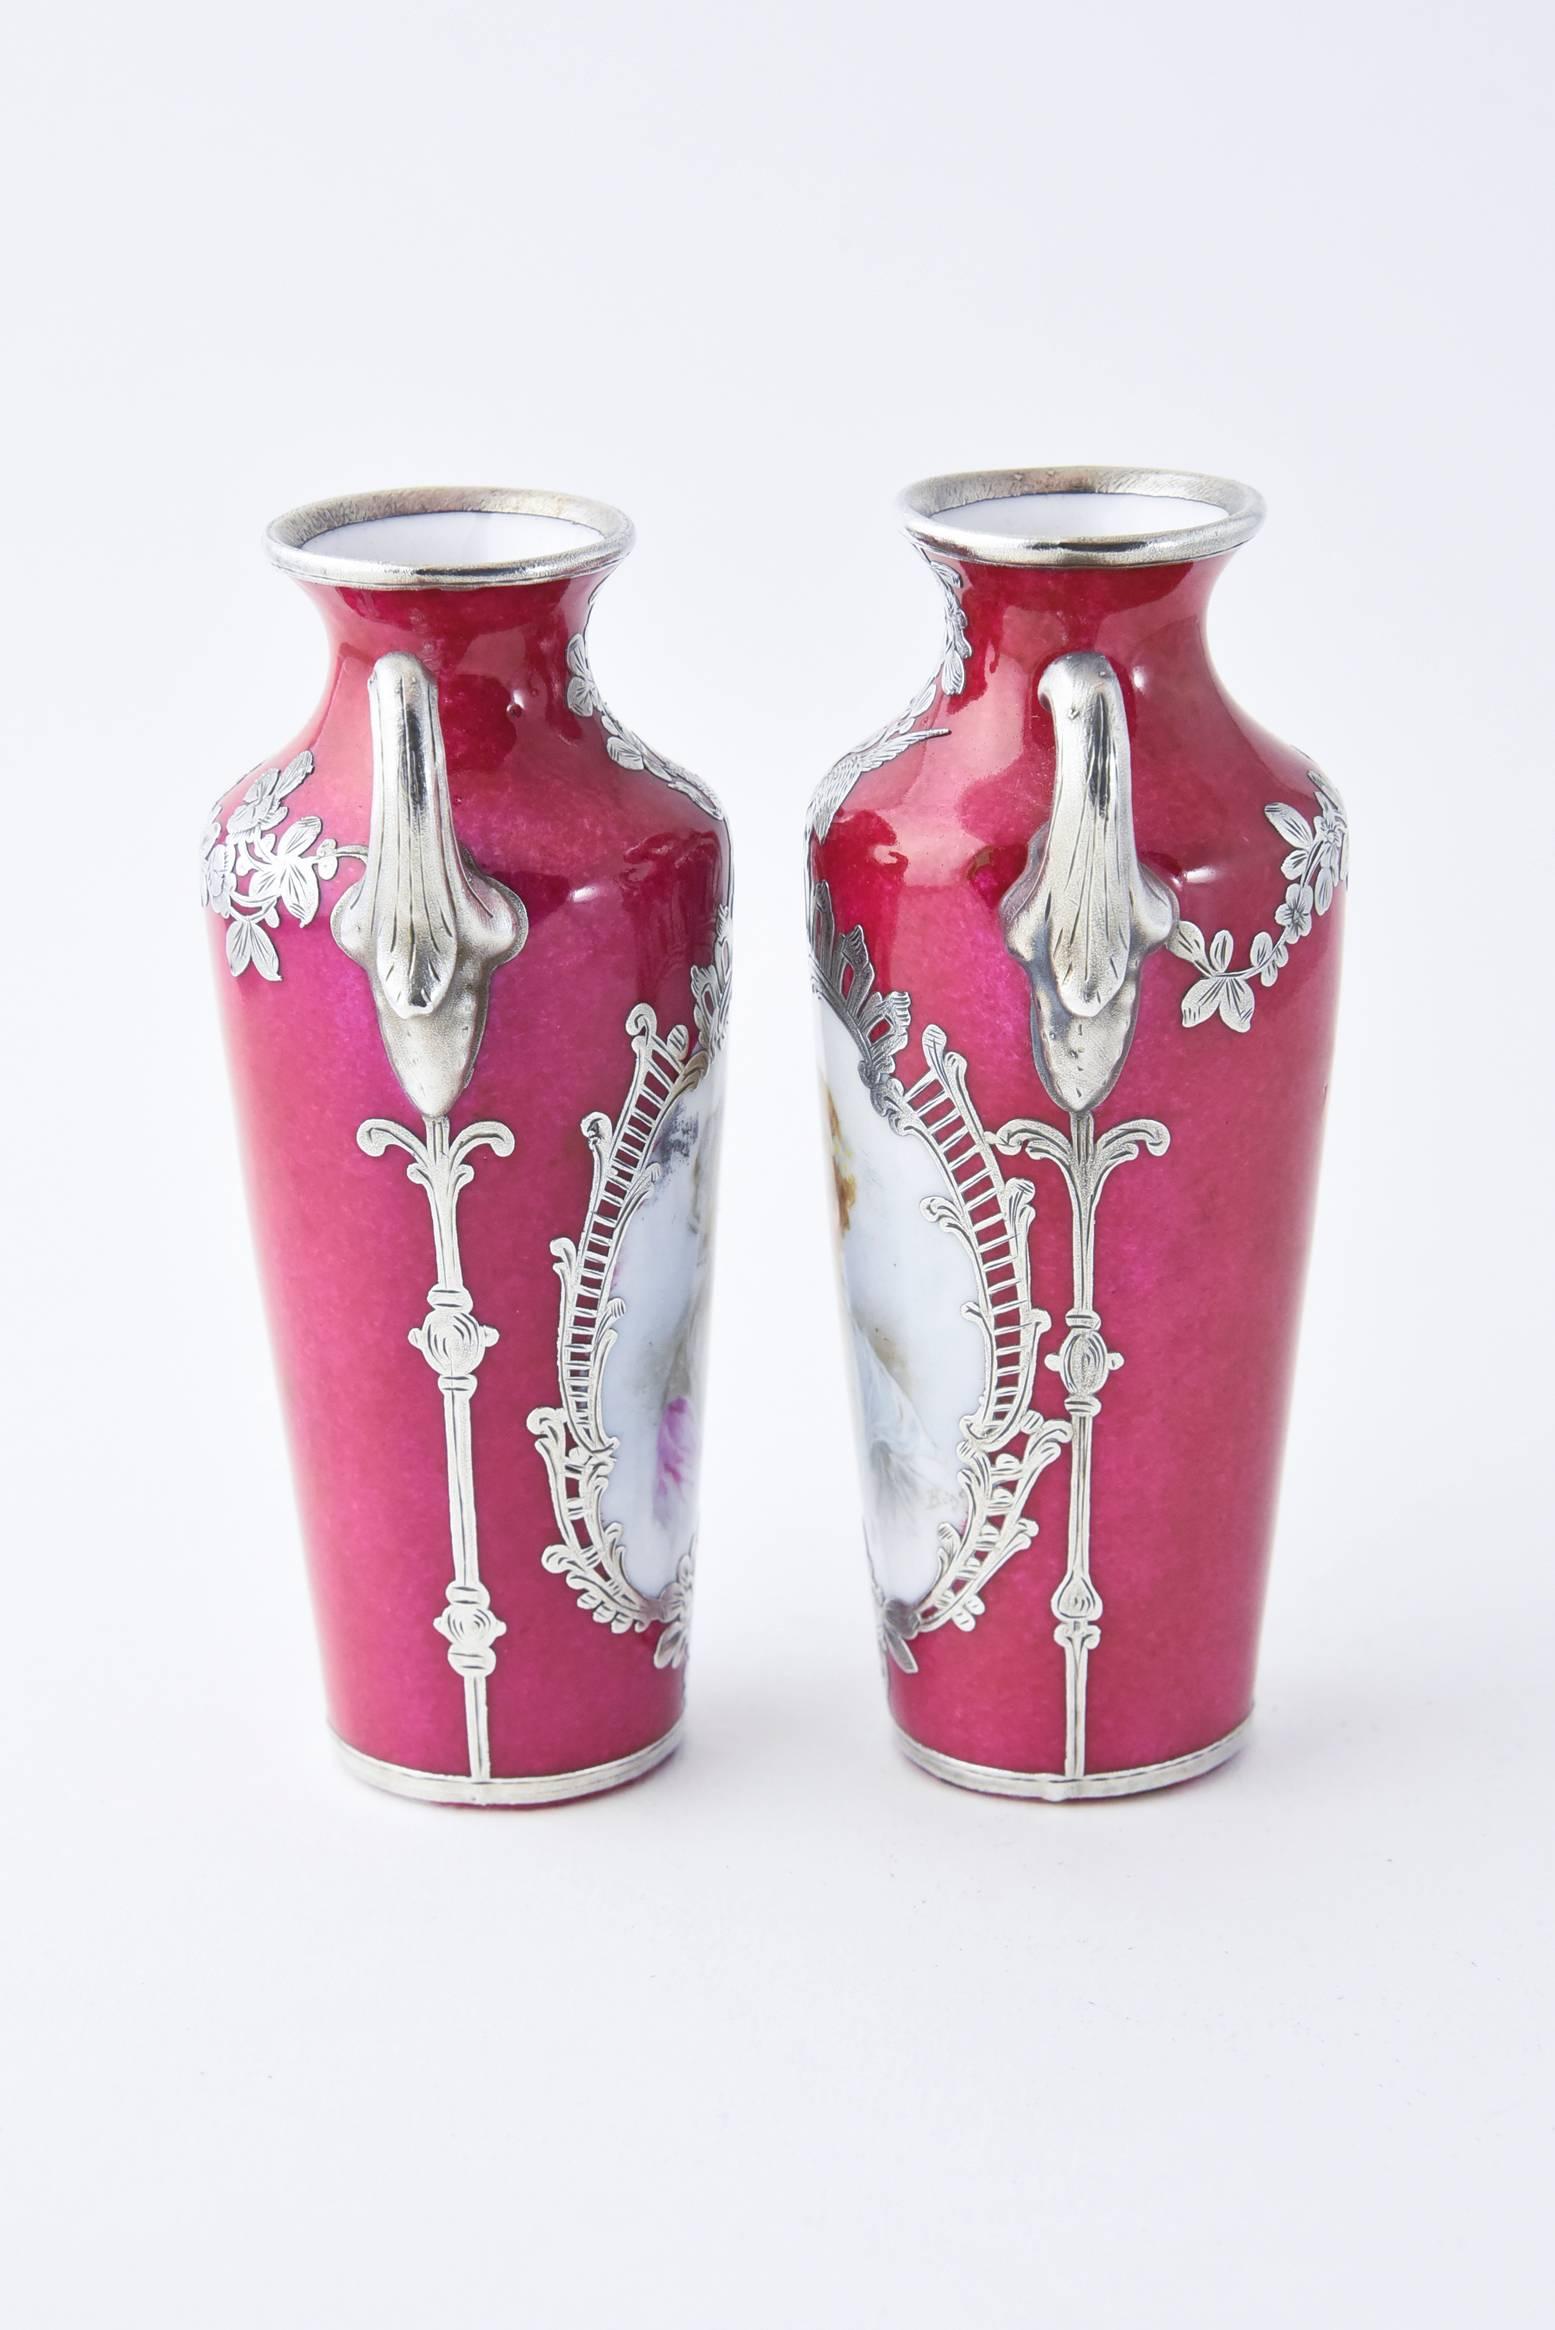 Pair of tiny beautiful porcelain vases / urns each featuring a hand painted portrait in an ornate sterling silver overlay frame with floral and bird accents.